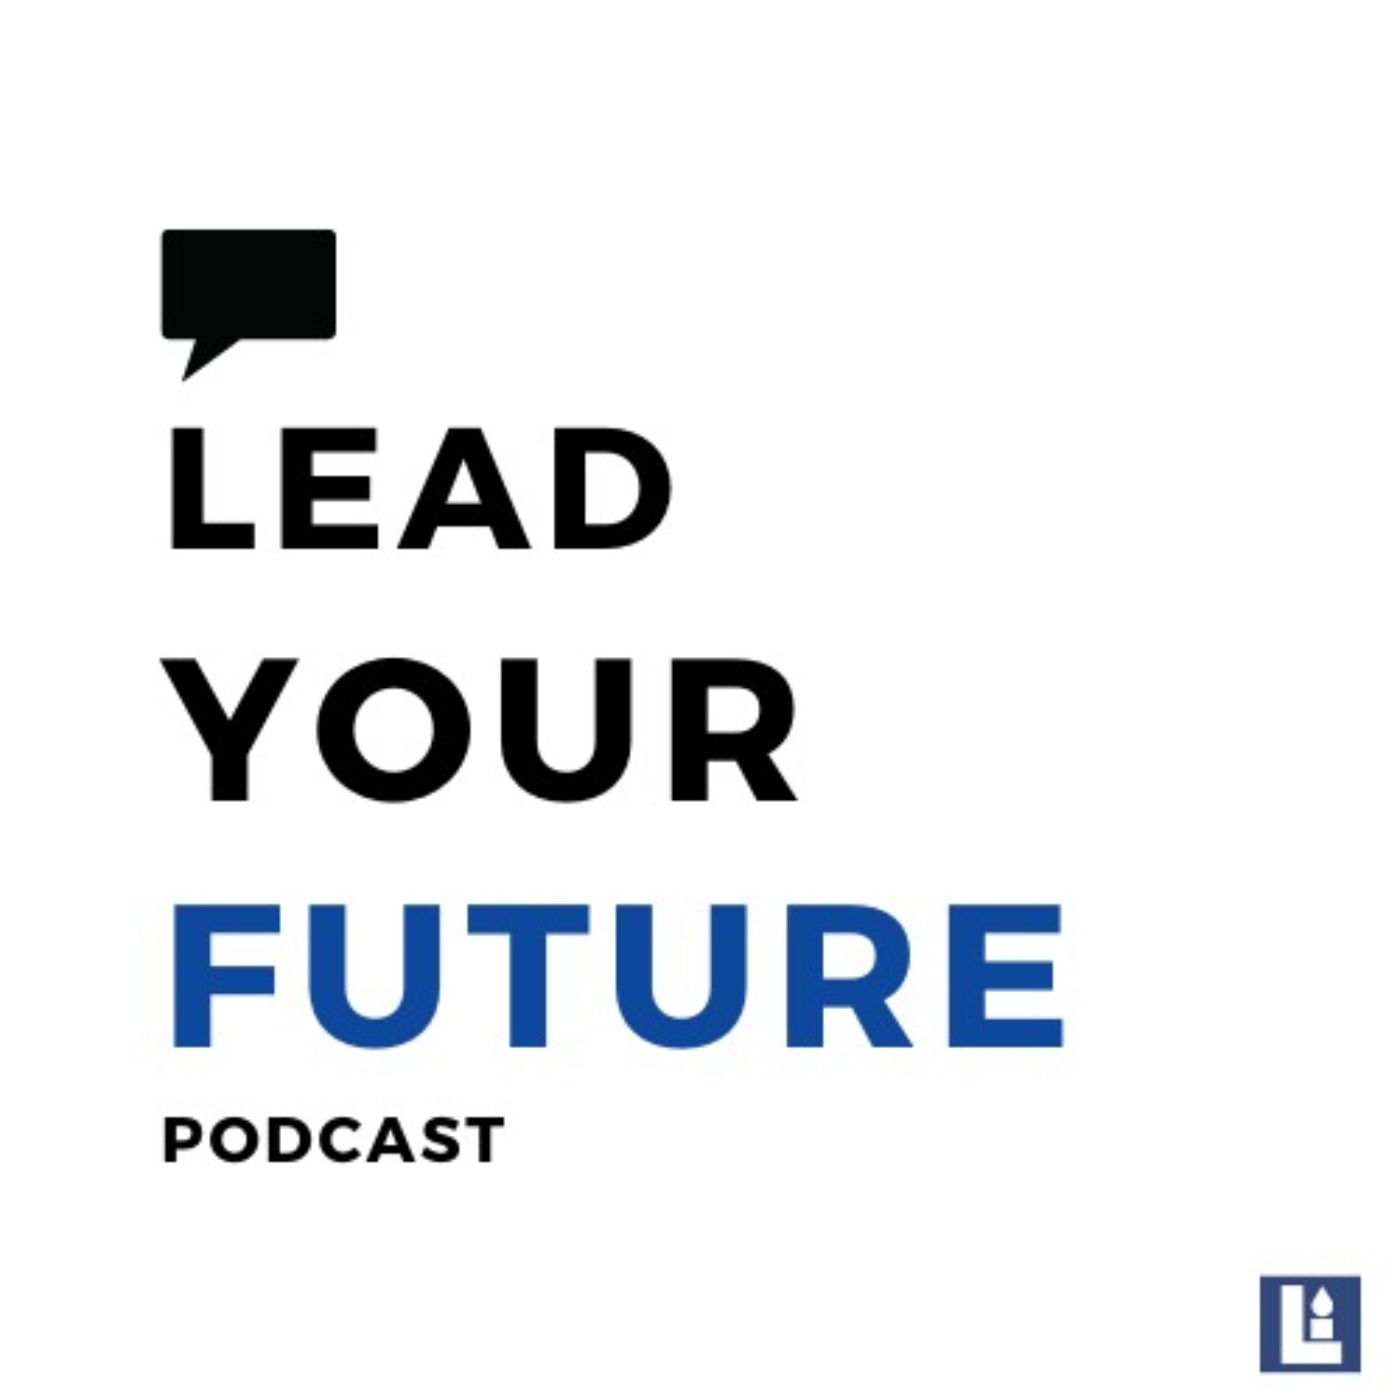 Lead Your Future Podcast Listen Online Free No Signup